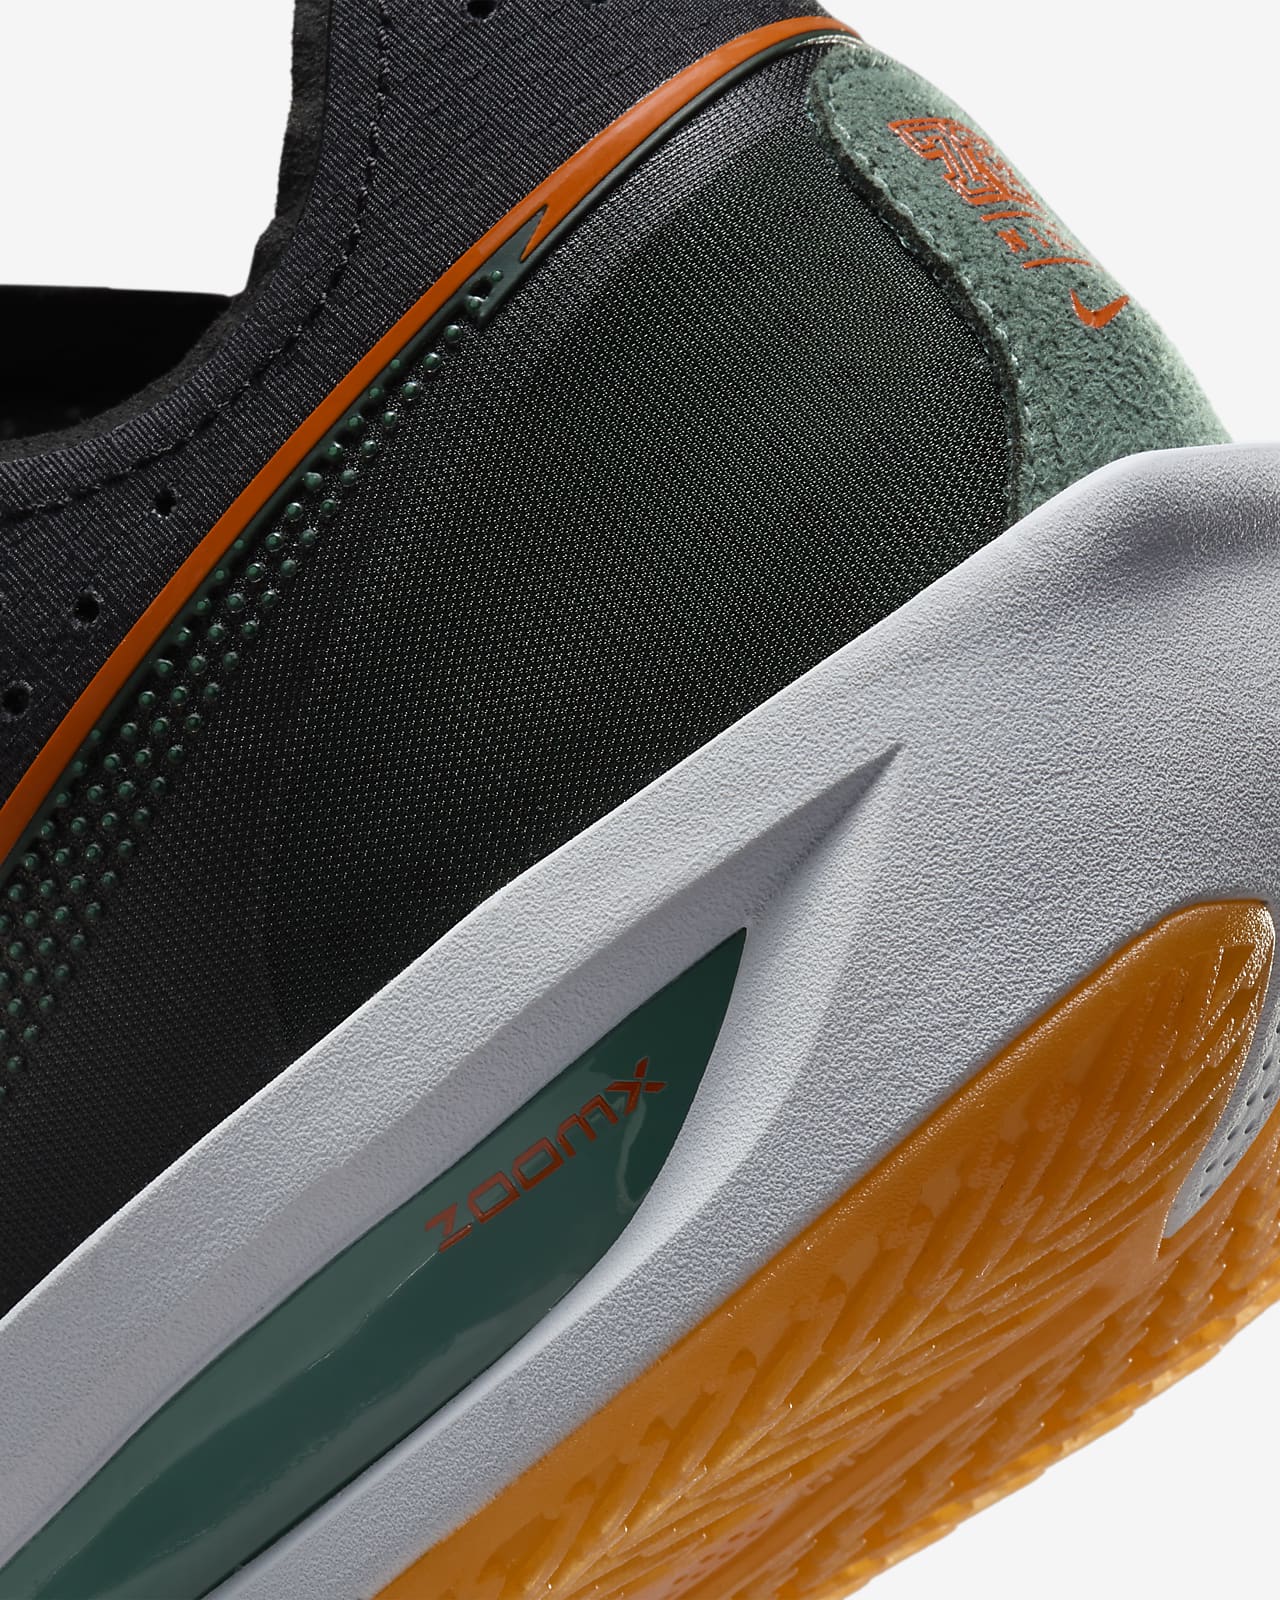 The Nike G.T. Cut 3 Is the First Basketball Sneaker With ZoomX Foam